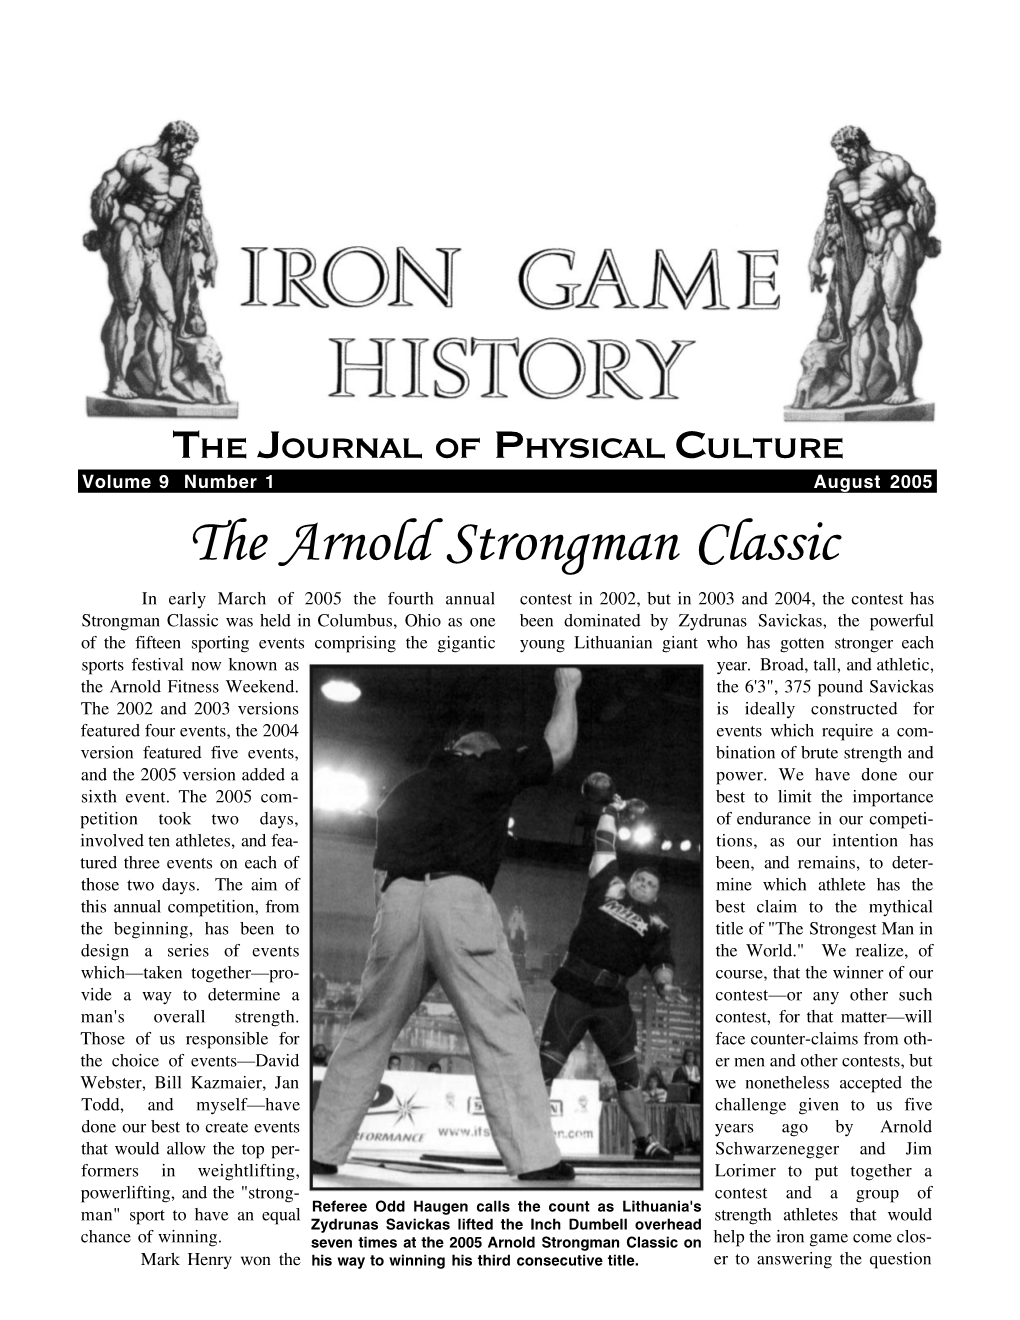 The Arnold Strongman Classic